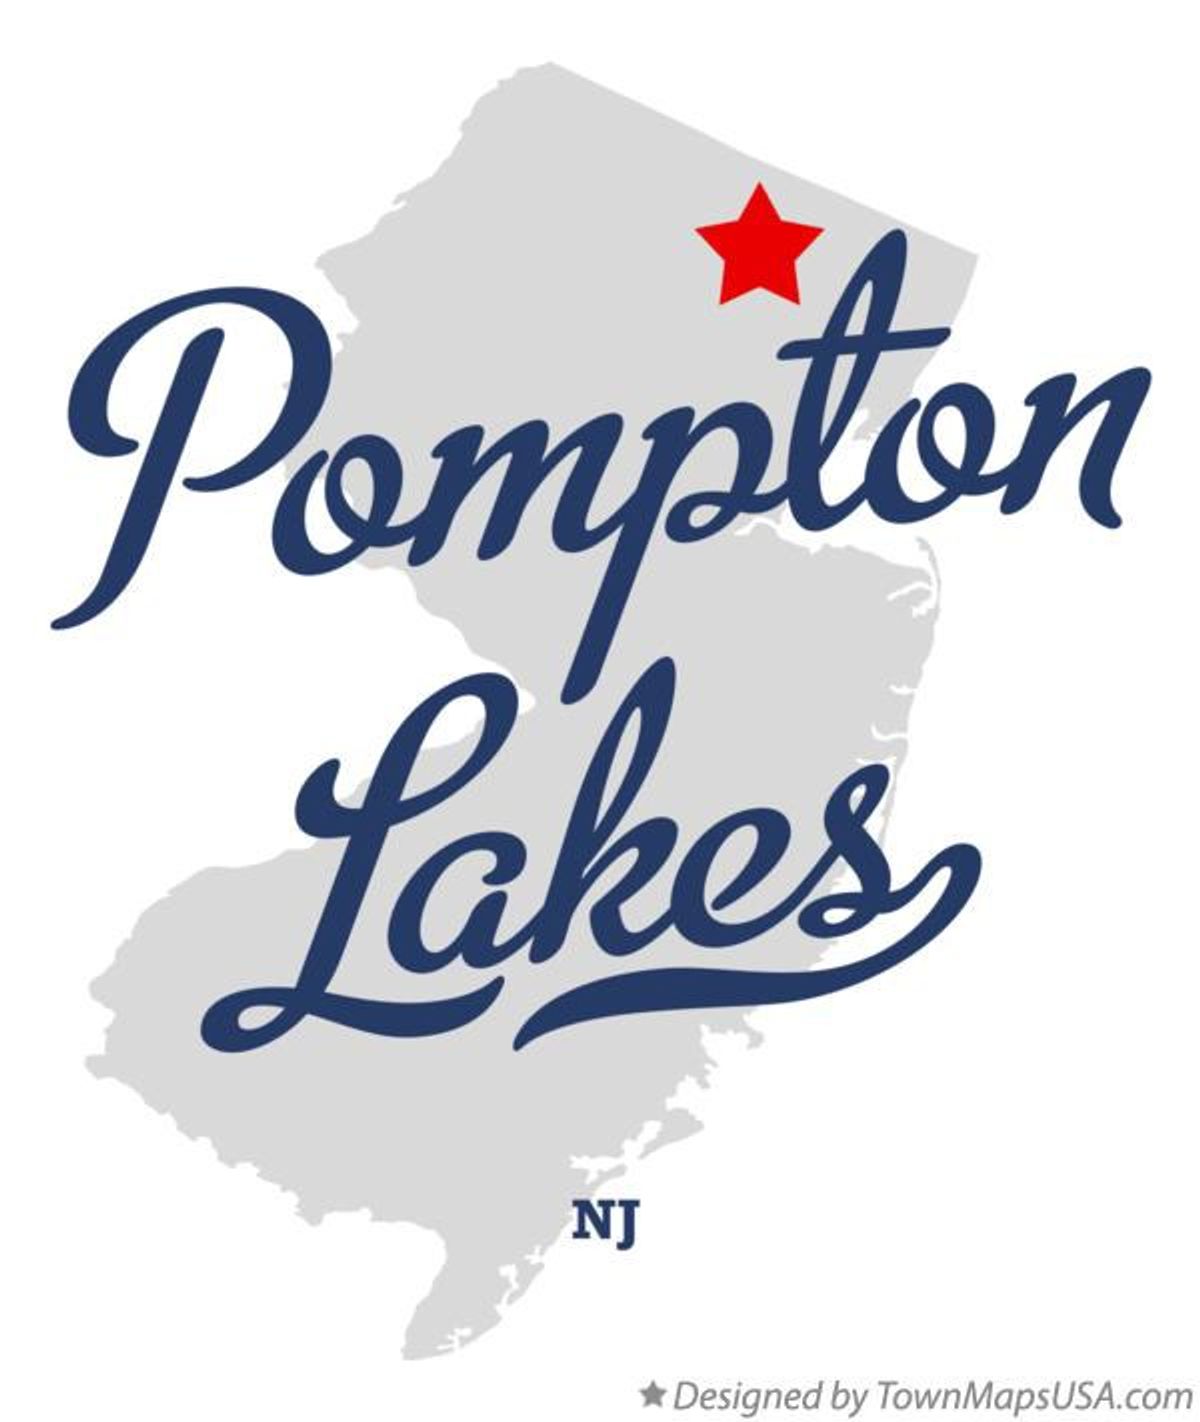 Pompton Lakes: An Ode To My HomeTown